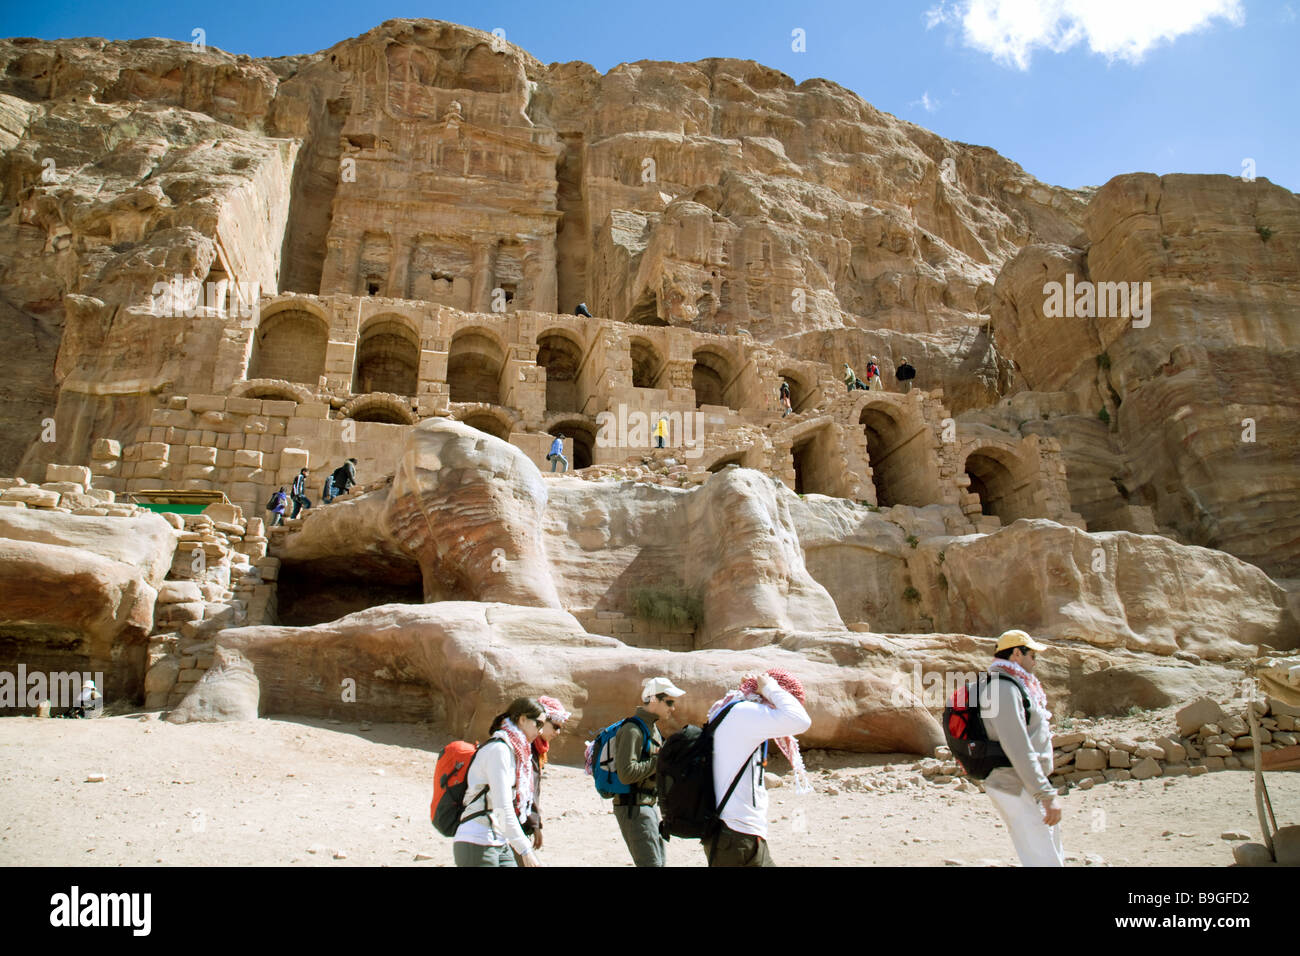 Tourists in front of the Urn tomb, Petra Jordan Stock Photo